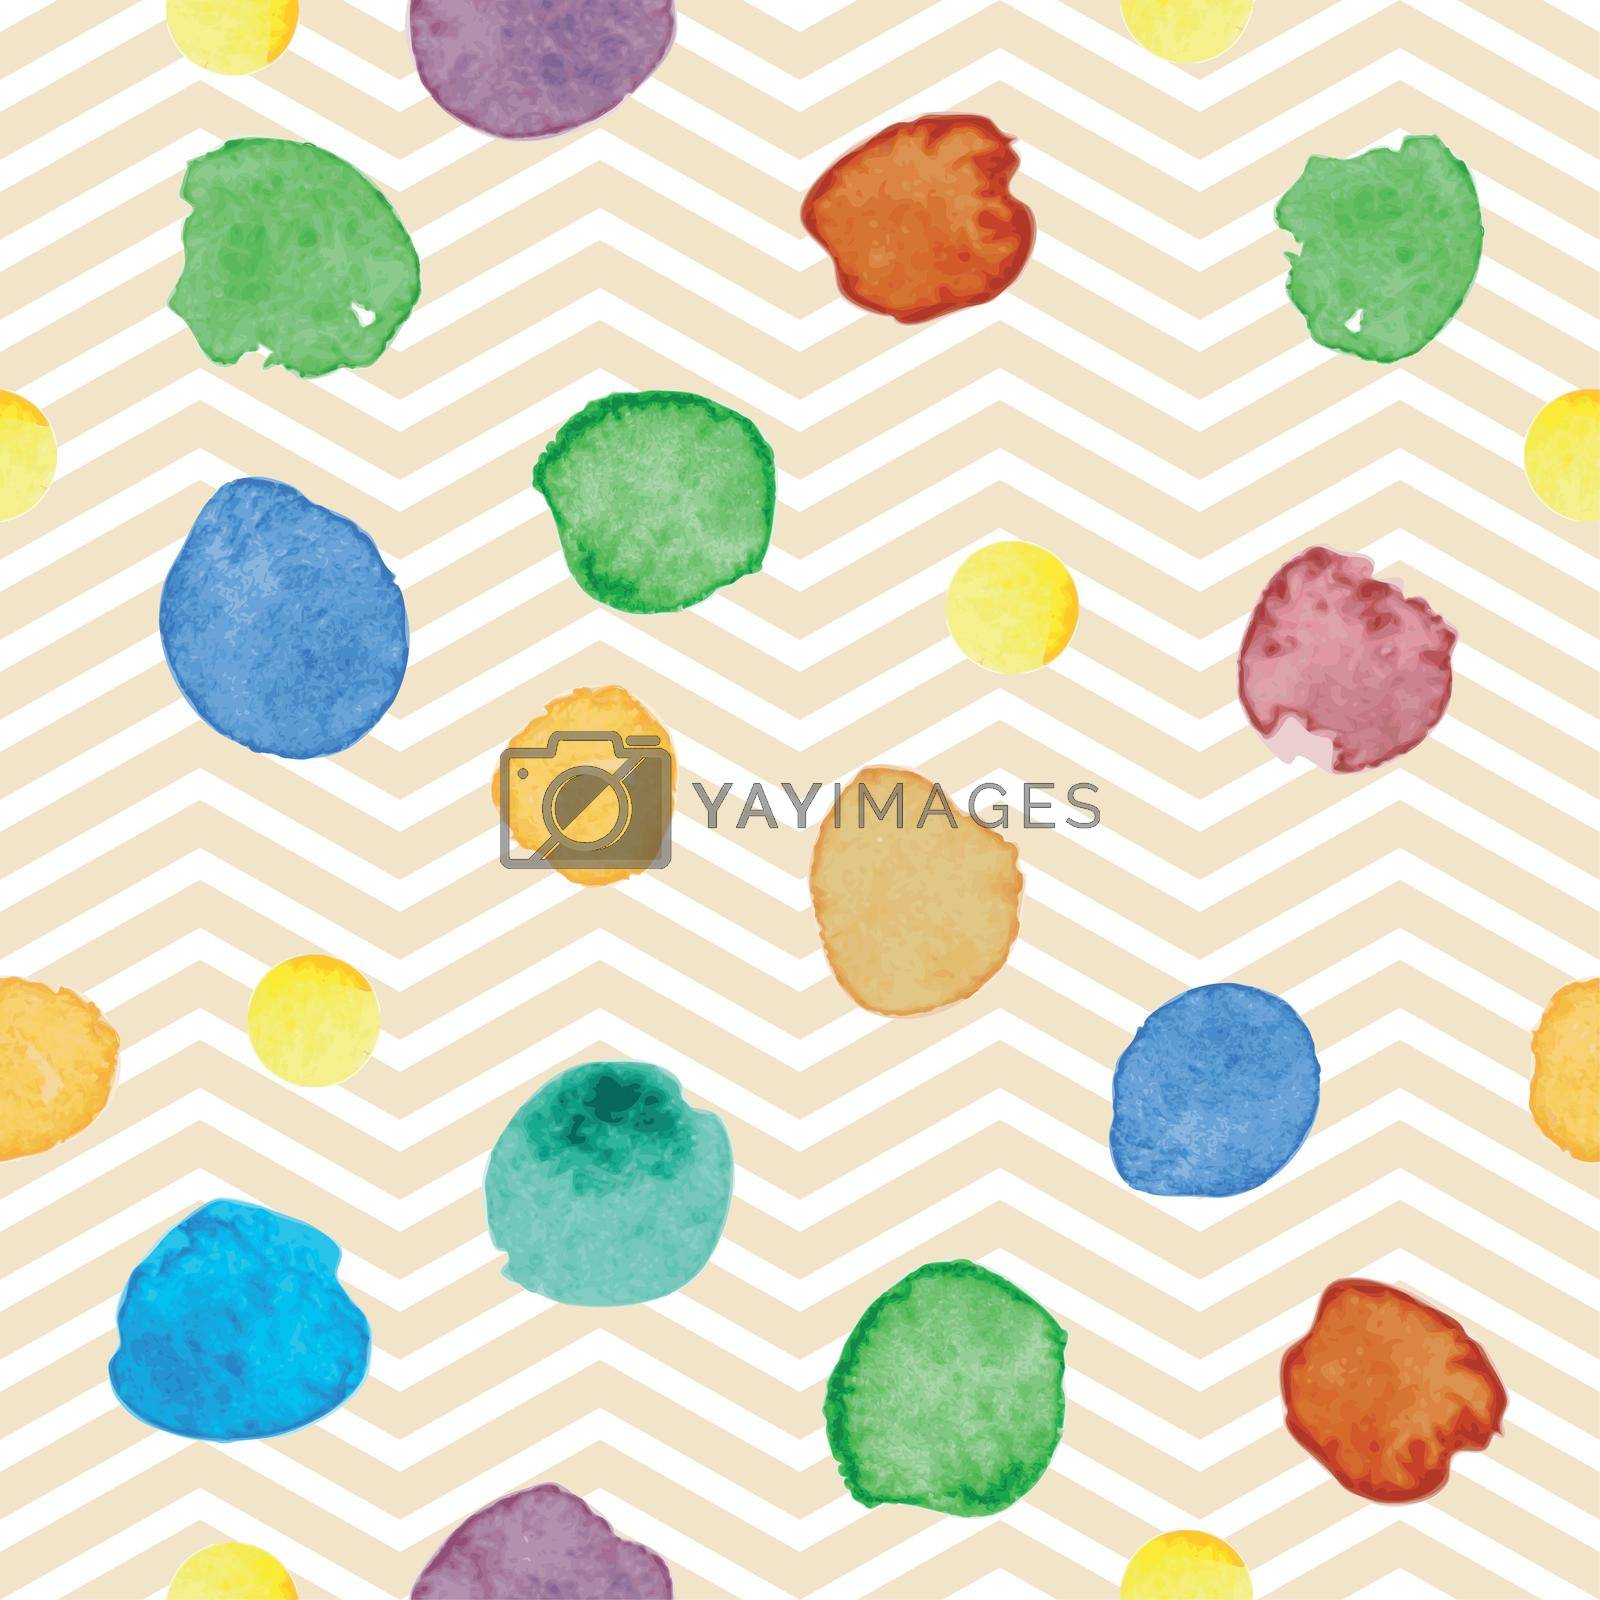 Watercolor handmade splashes on a geometric background. Different shades of yellow, green, blue